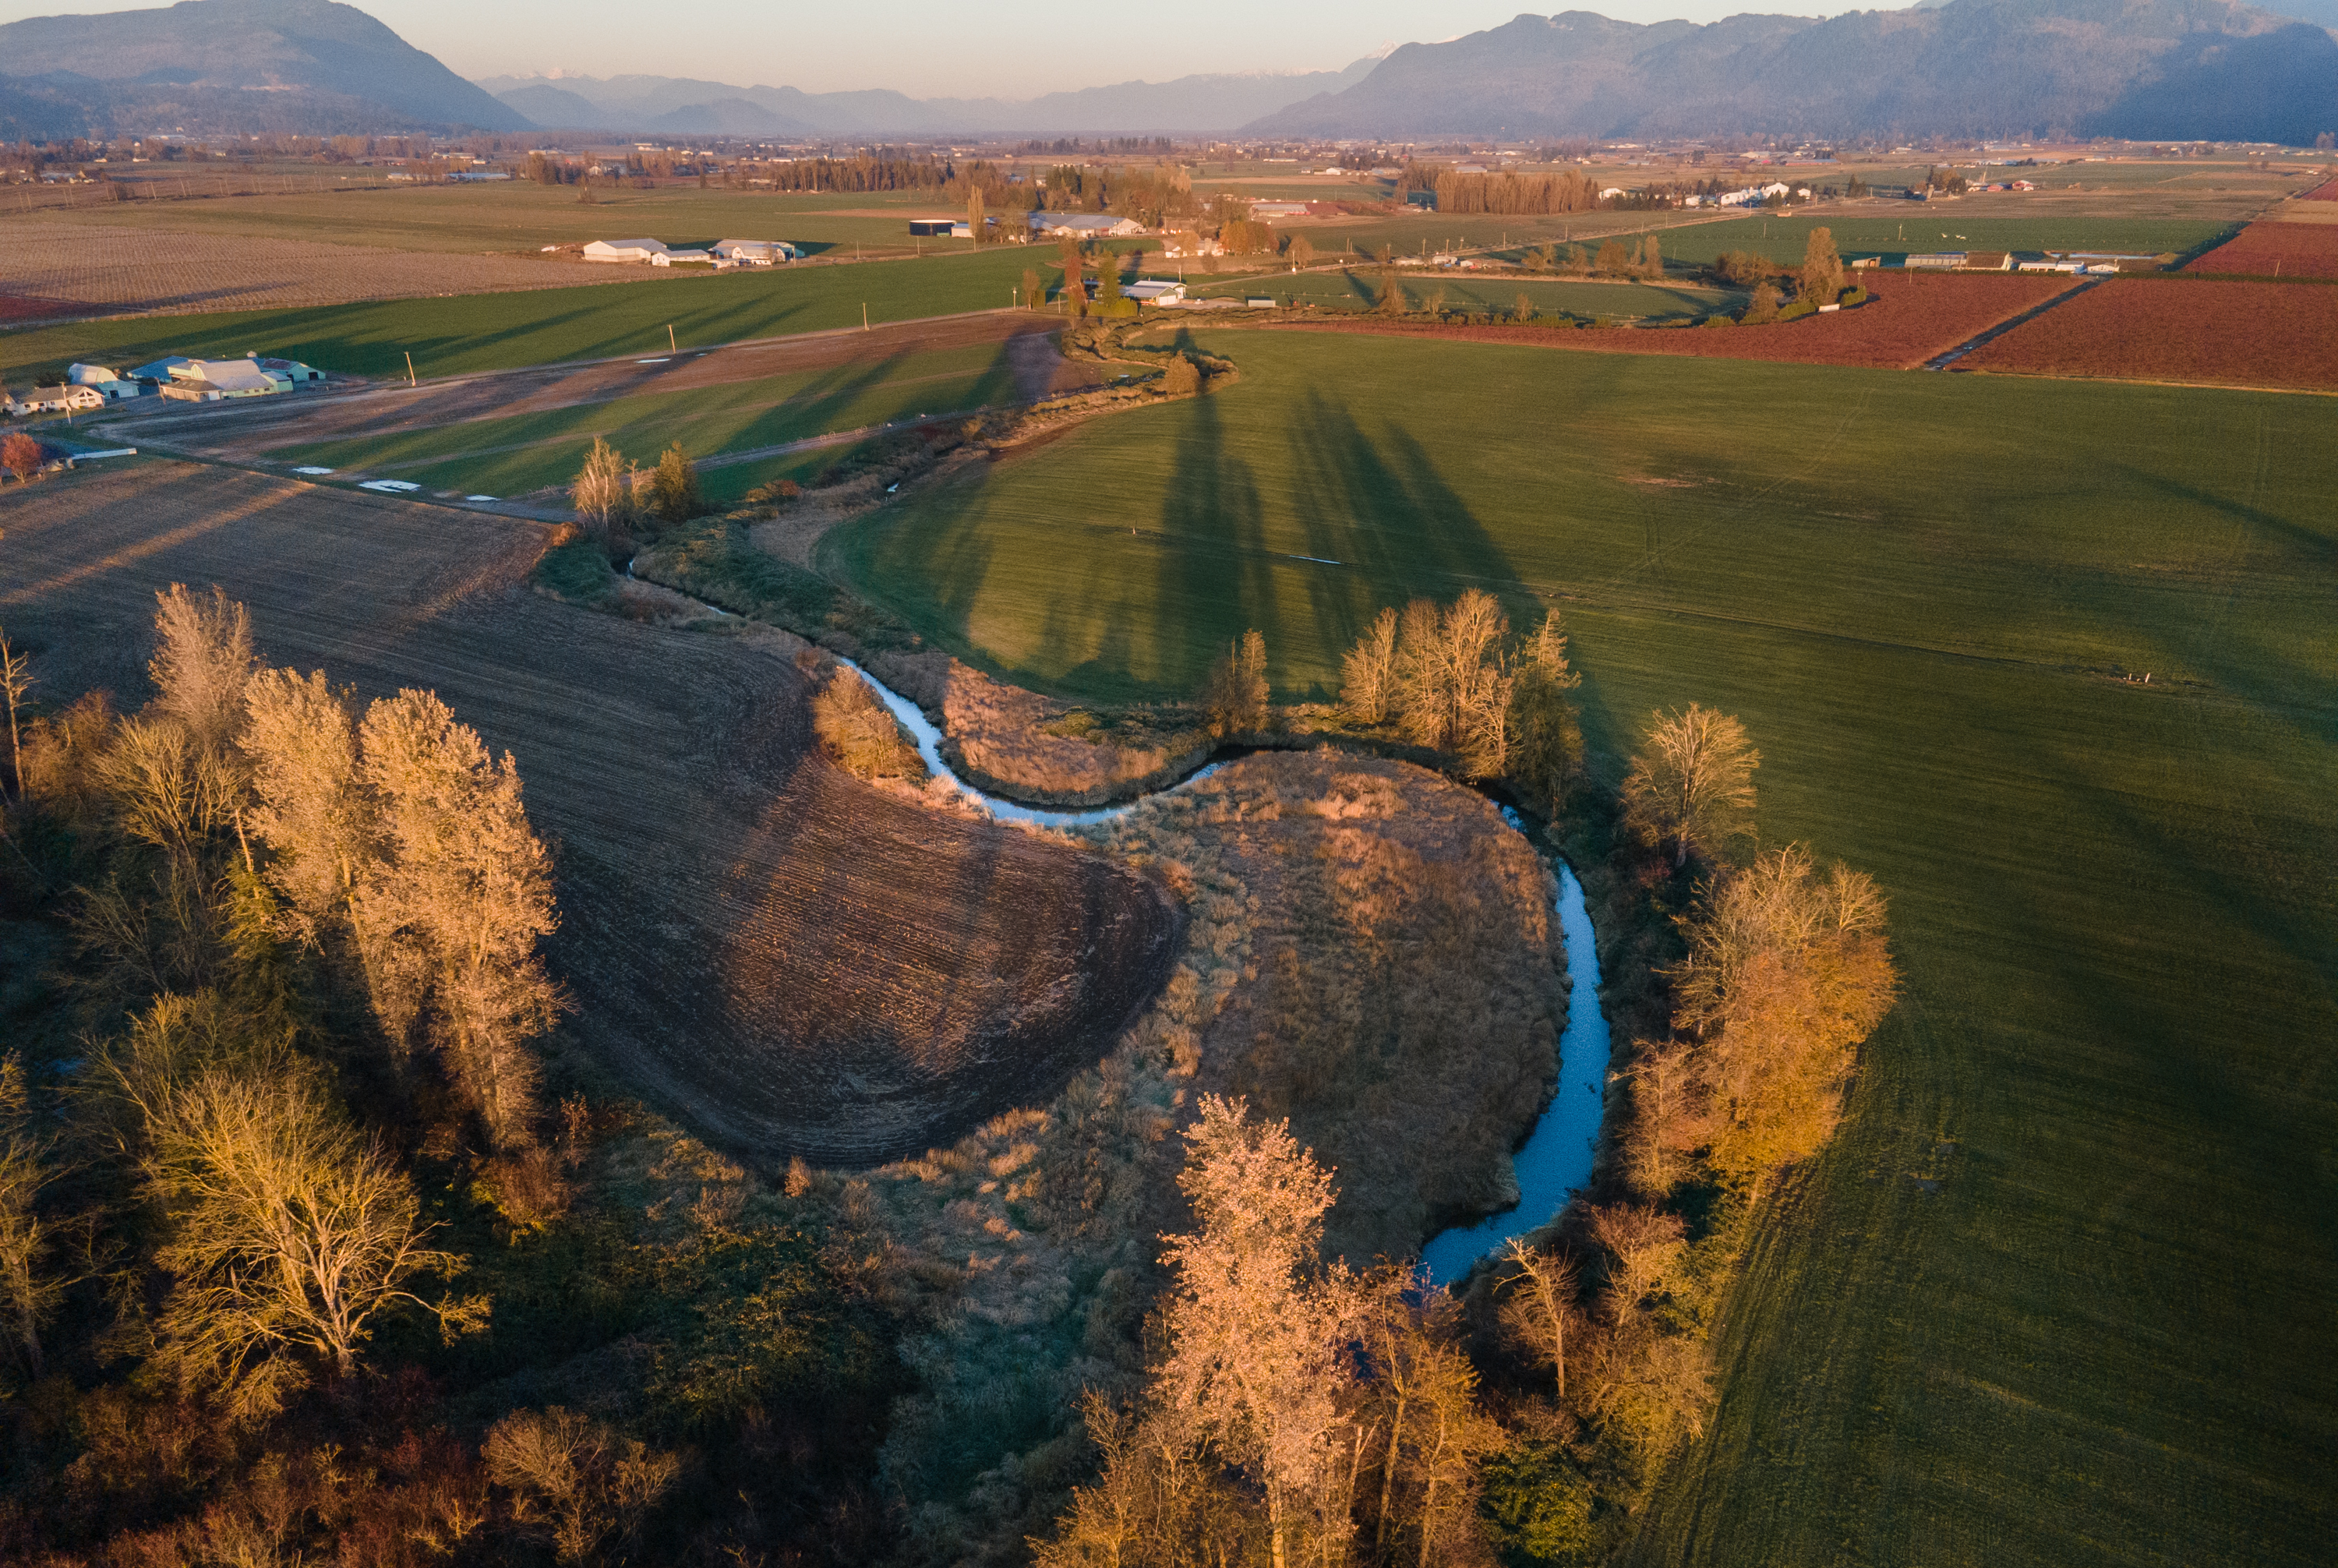 Part II: The Sumas River winds through north Whatcom County and crosses the Canadian border, eventually draining into the Fraser River. Historically, though, it flowed into the former Sumas Lake, which was drained in 1924.